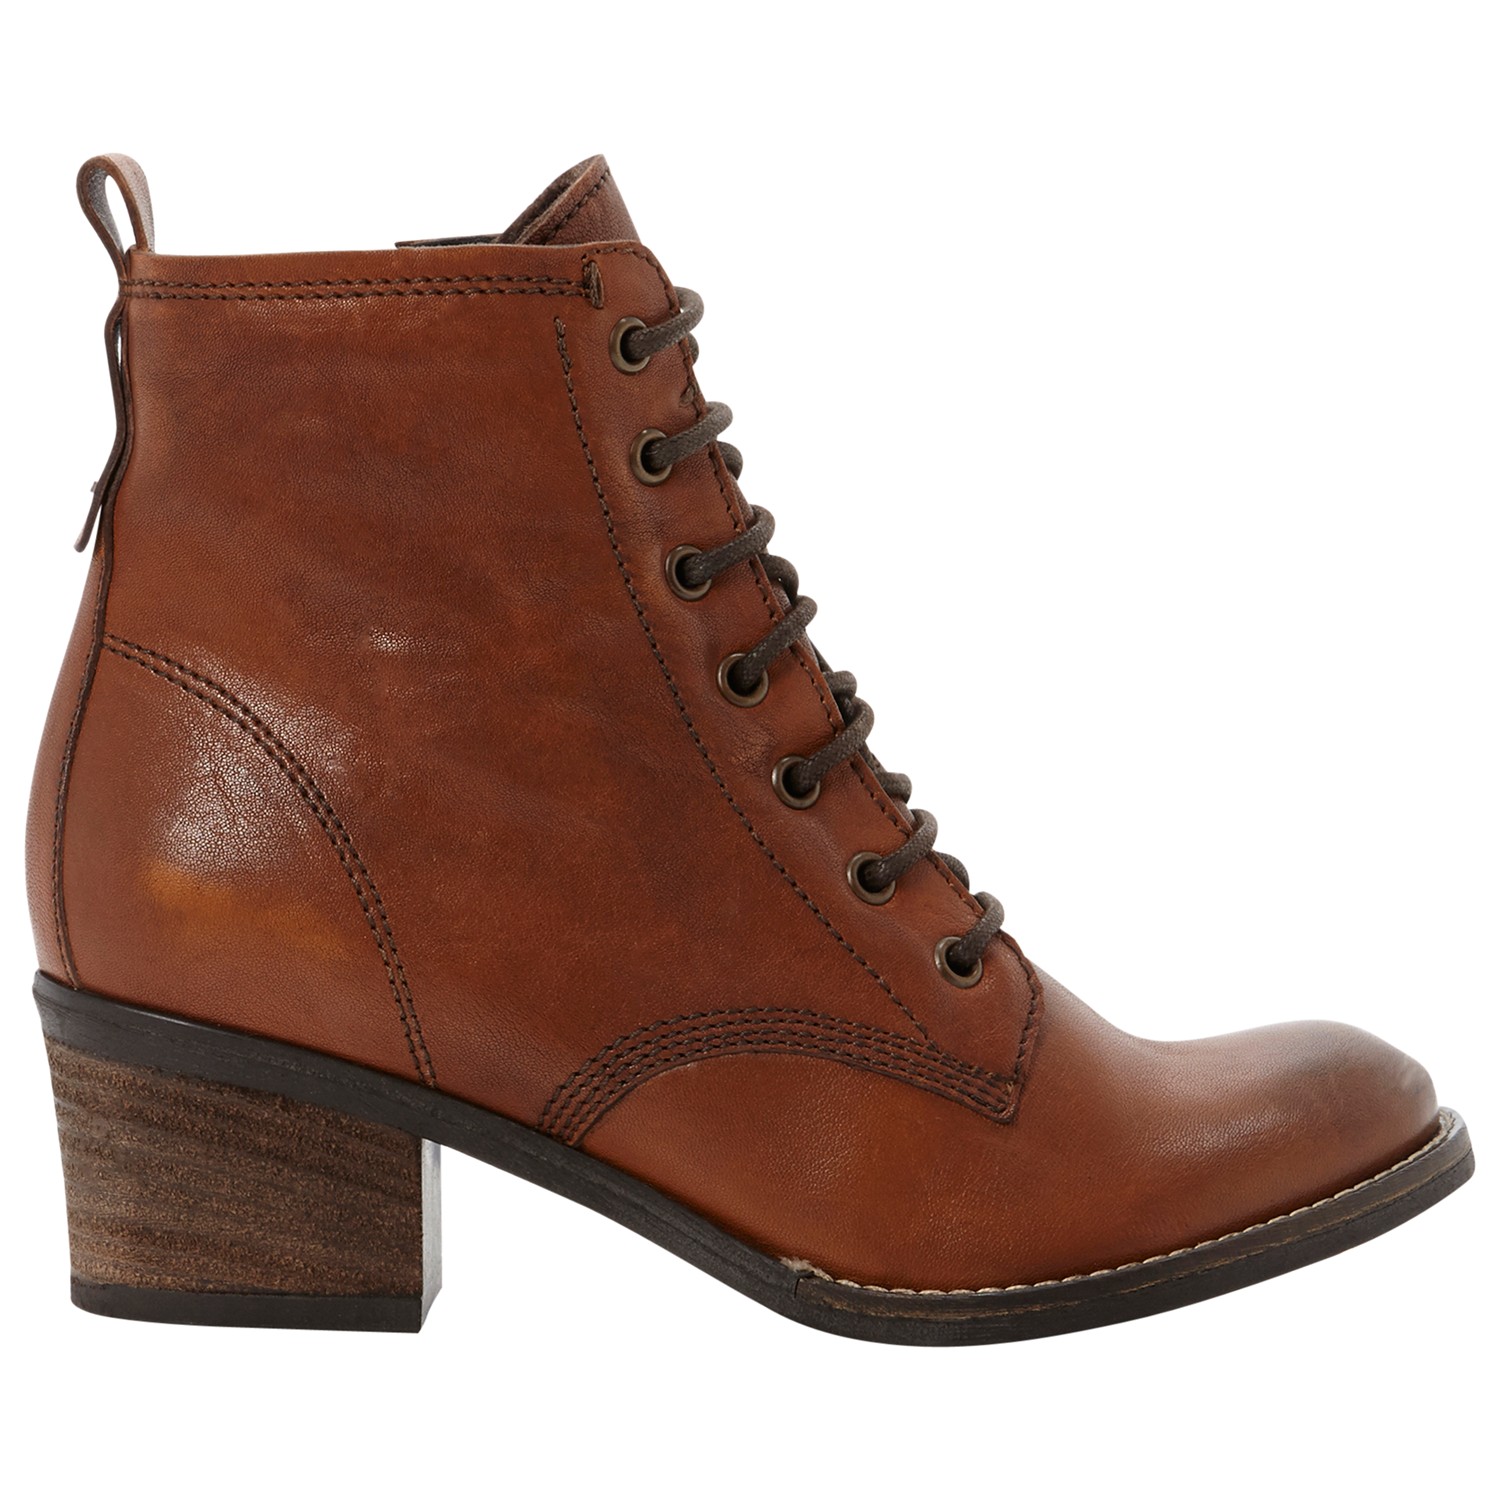 Dune Peetons Leather Boots - For Women in Brown (Tan) | Lyst